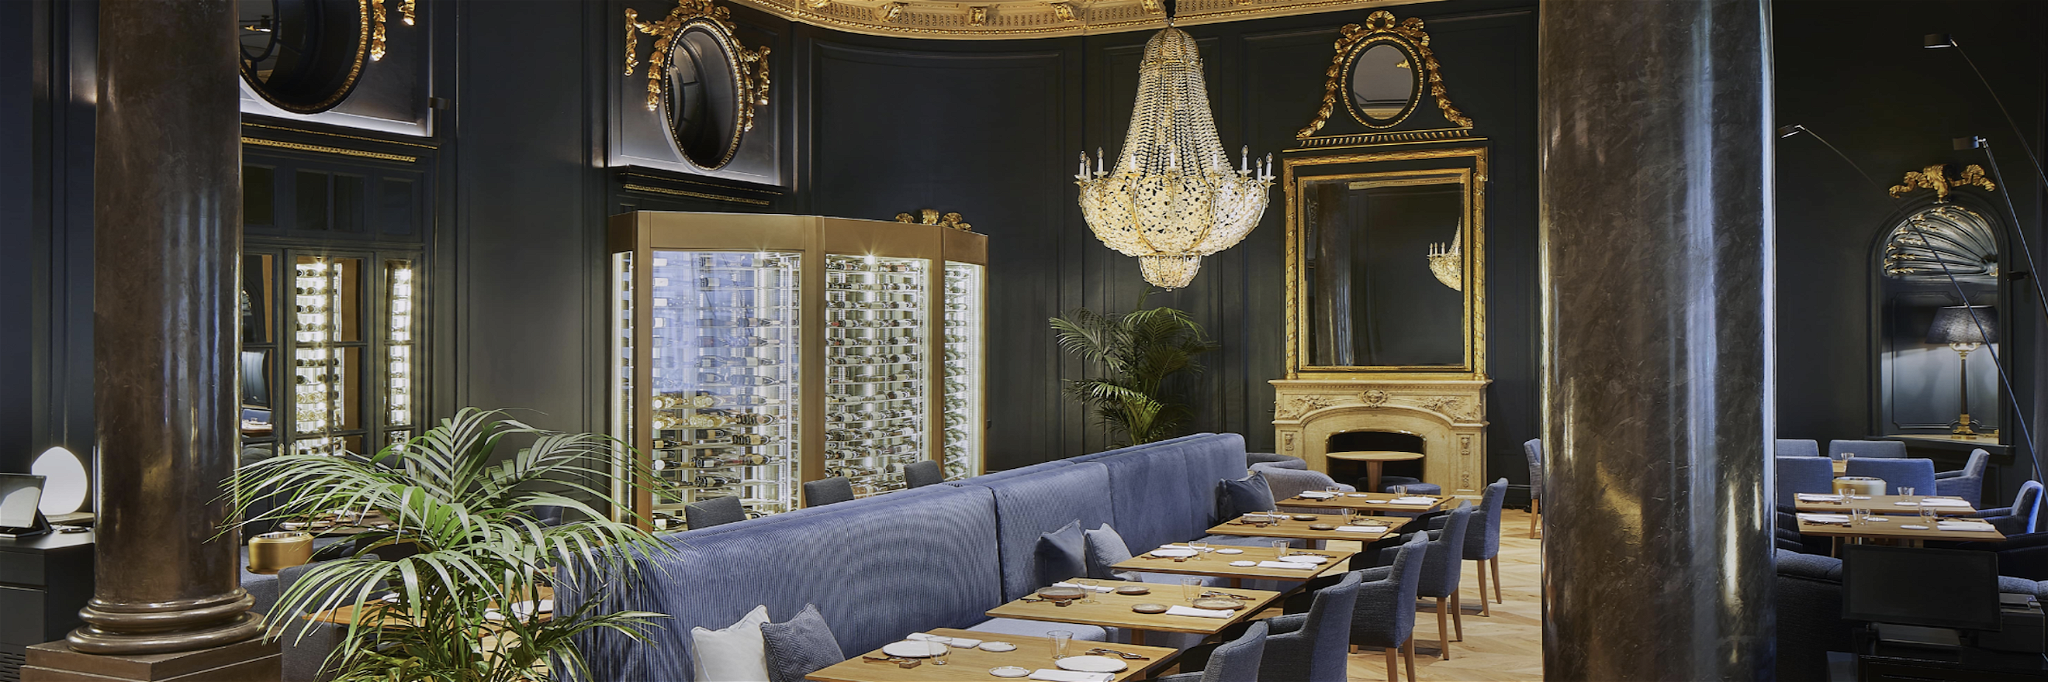 The gold and blue interior design of Amar Barcelona